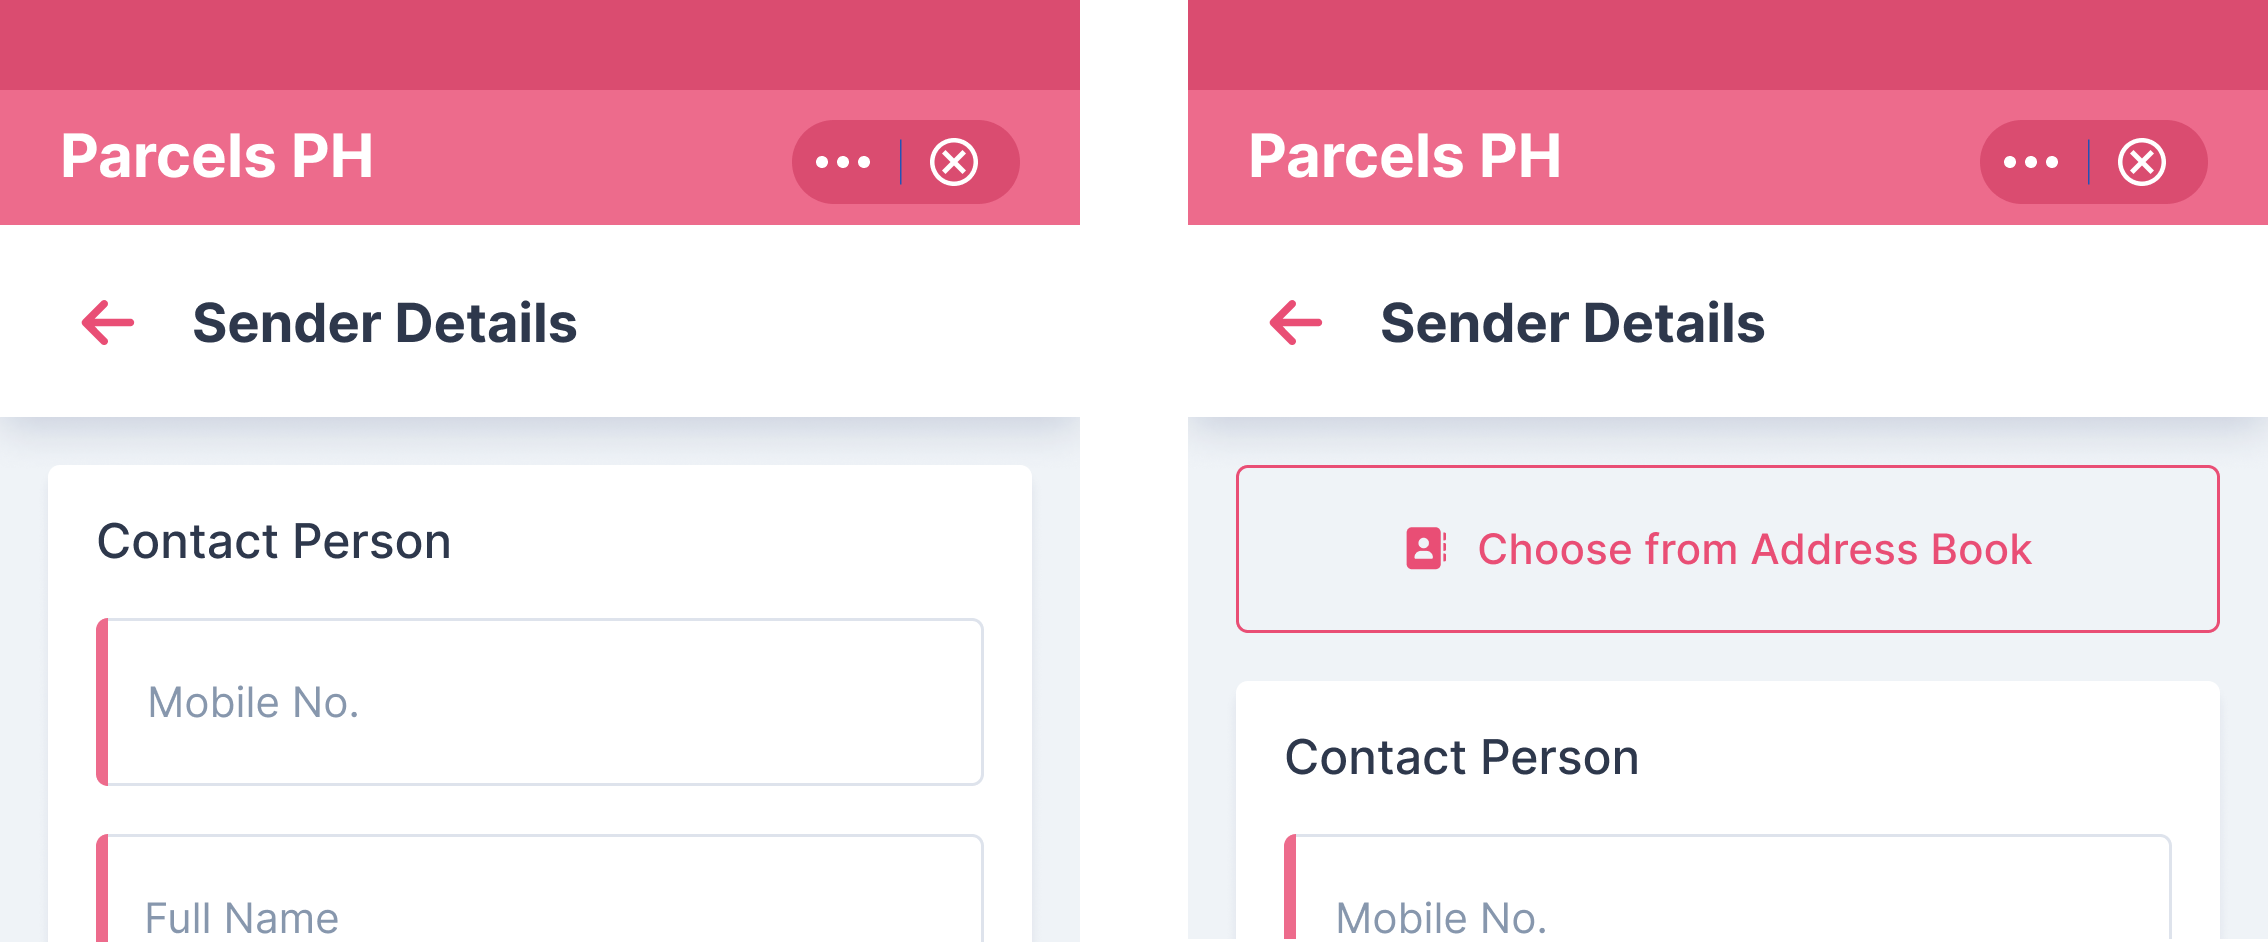 choose from address book button